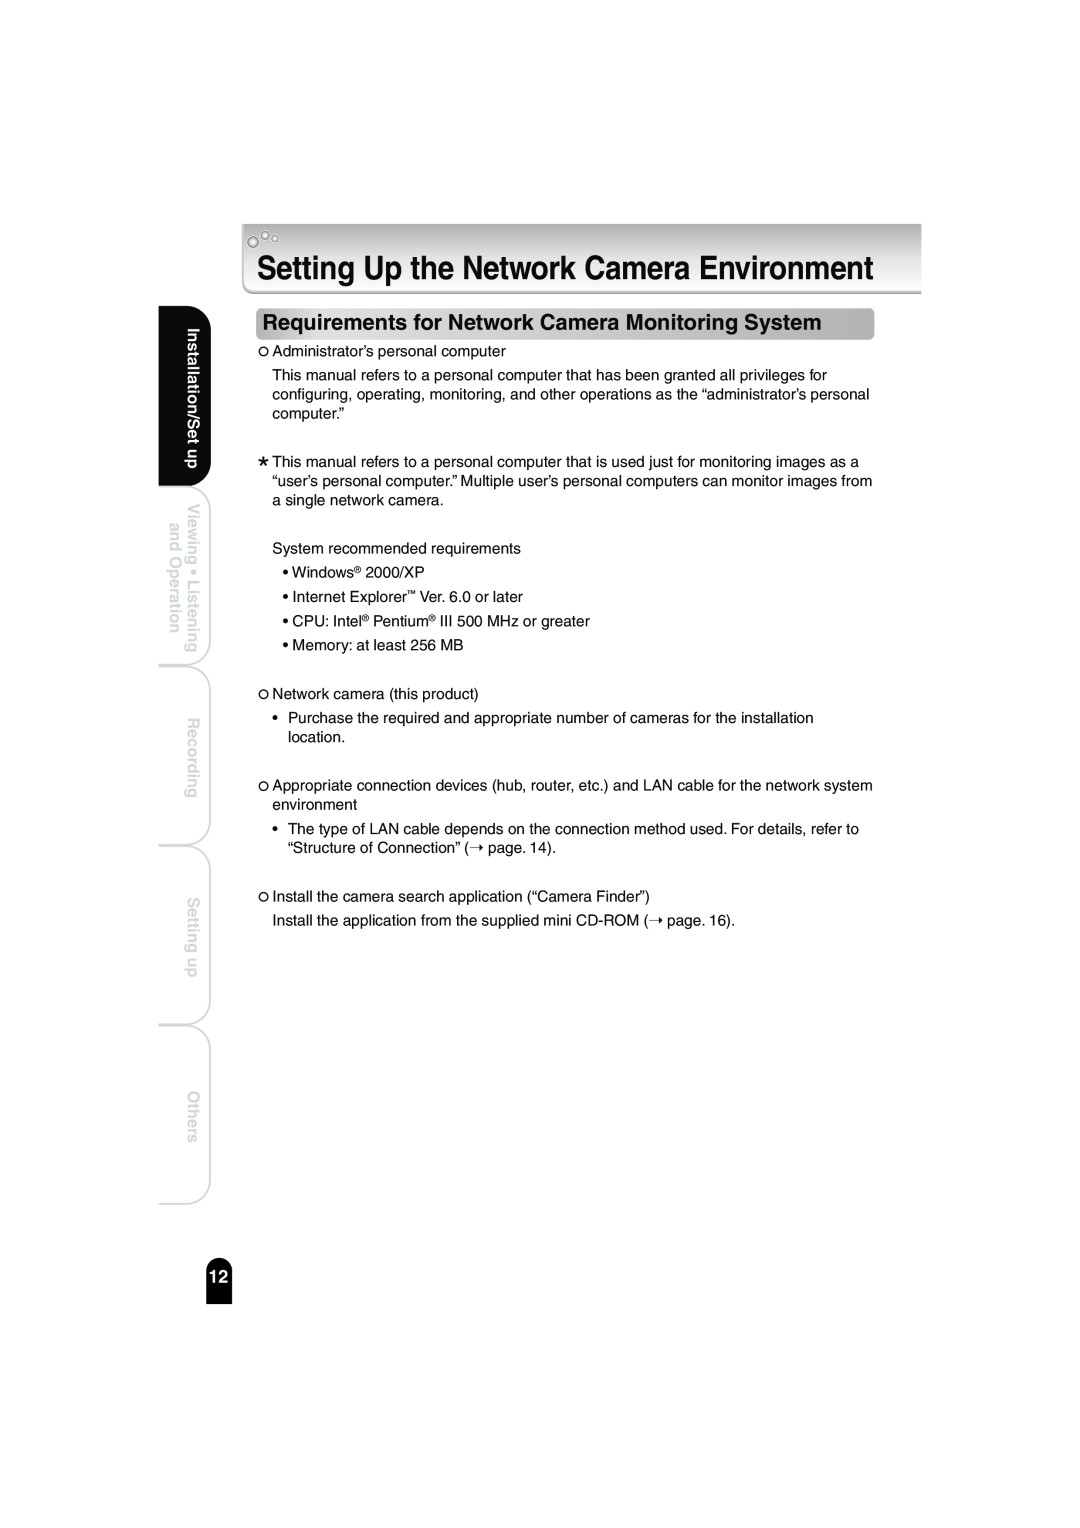 Toshiba IK-WB02A manual Setting Up the Network Camera Environment, Requirements for Network Camera Monitoring System 